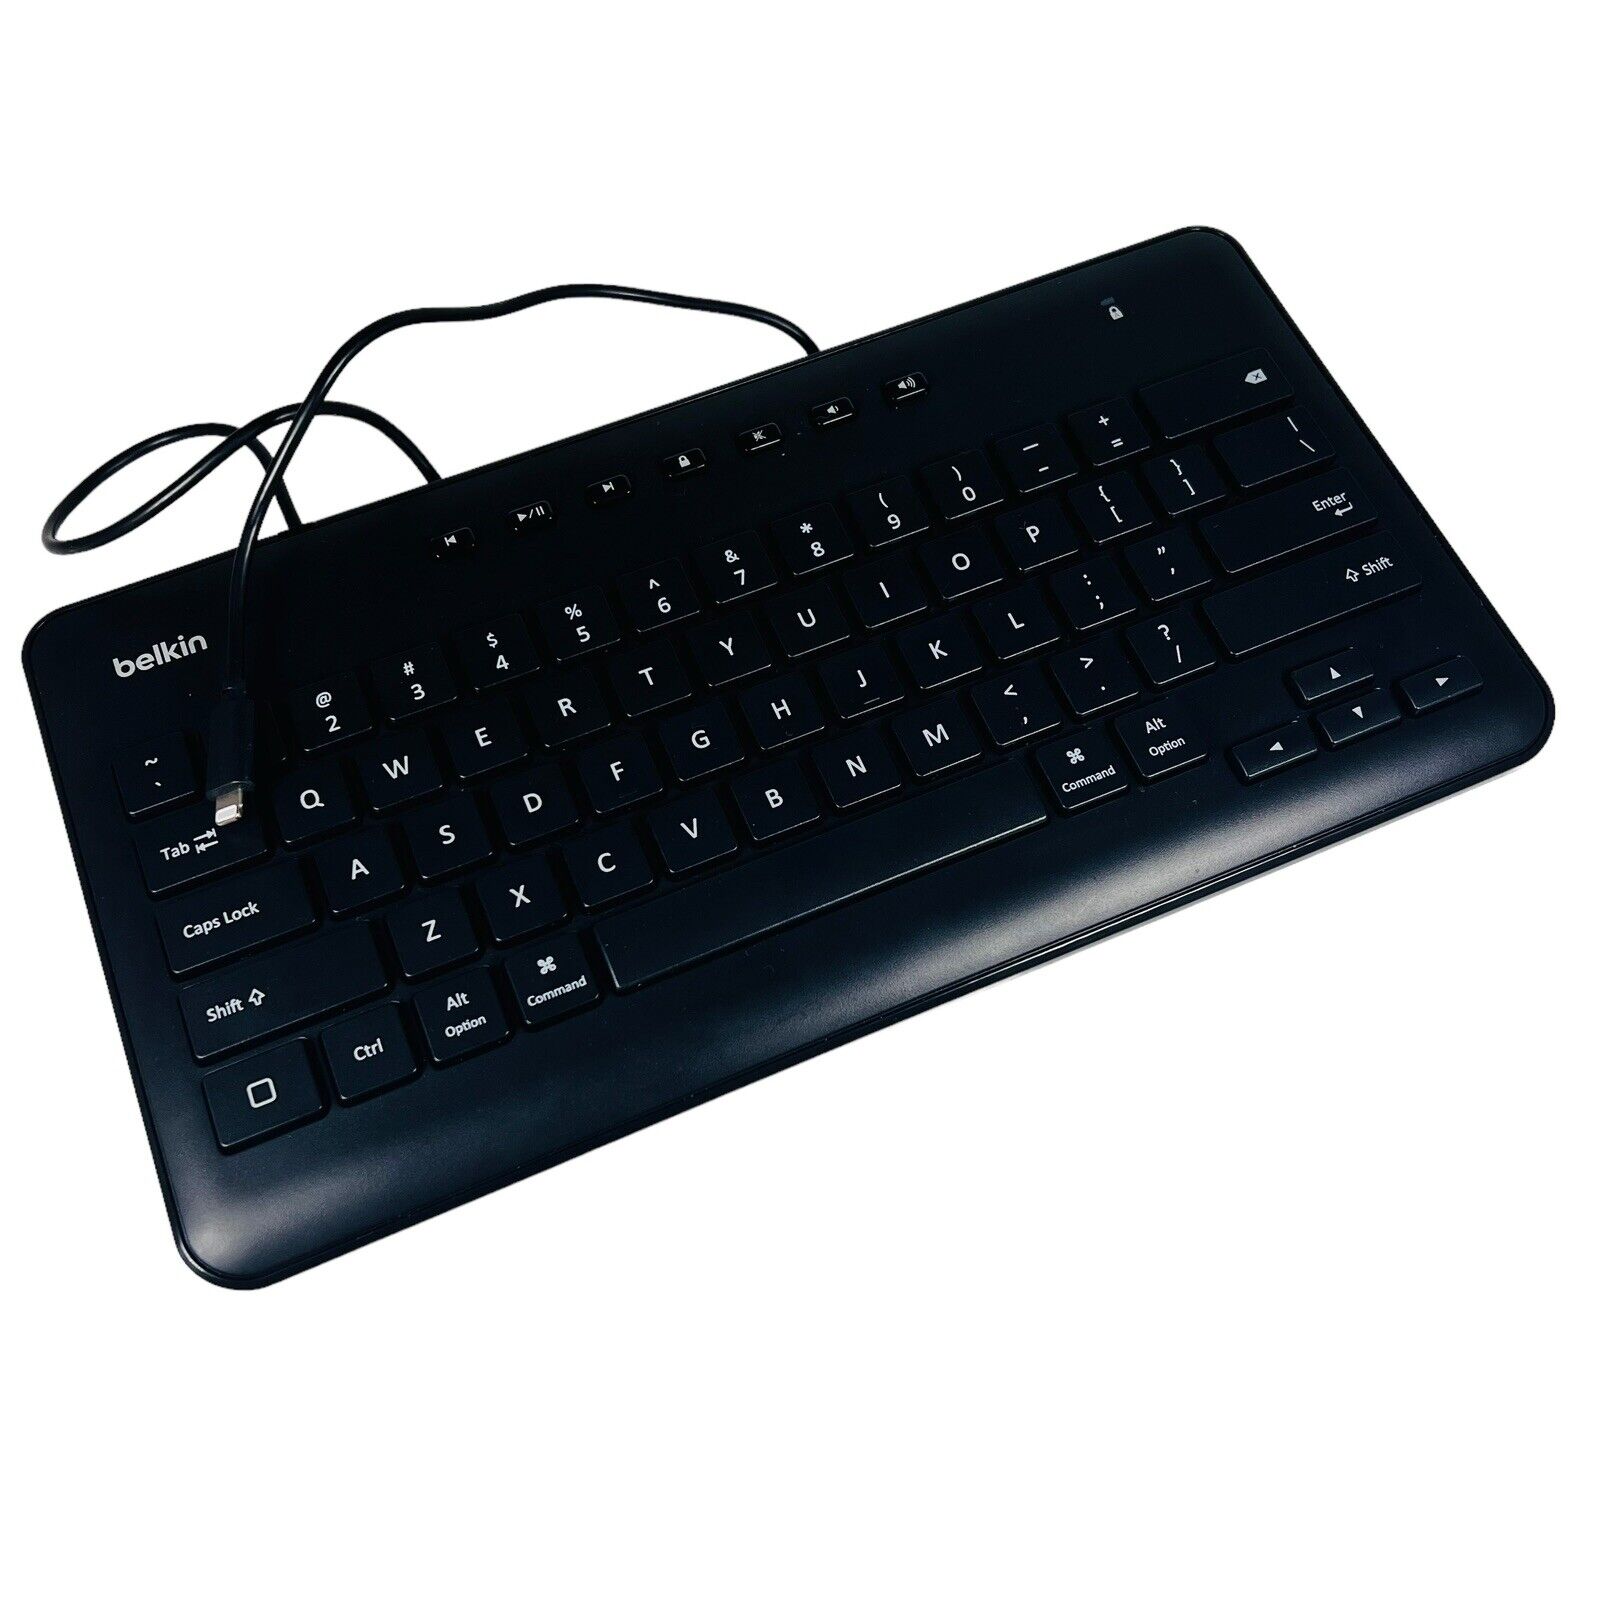 Belkin Wired Keyboard for iPad With Lightning Connector B2B124 